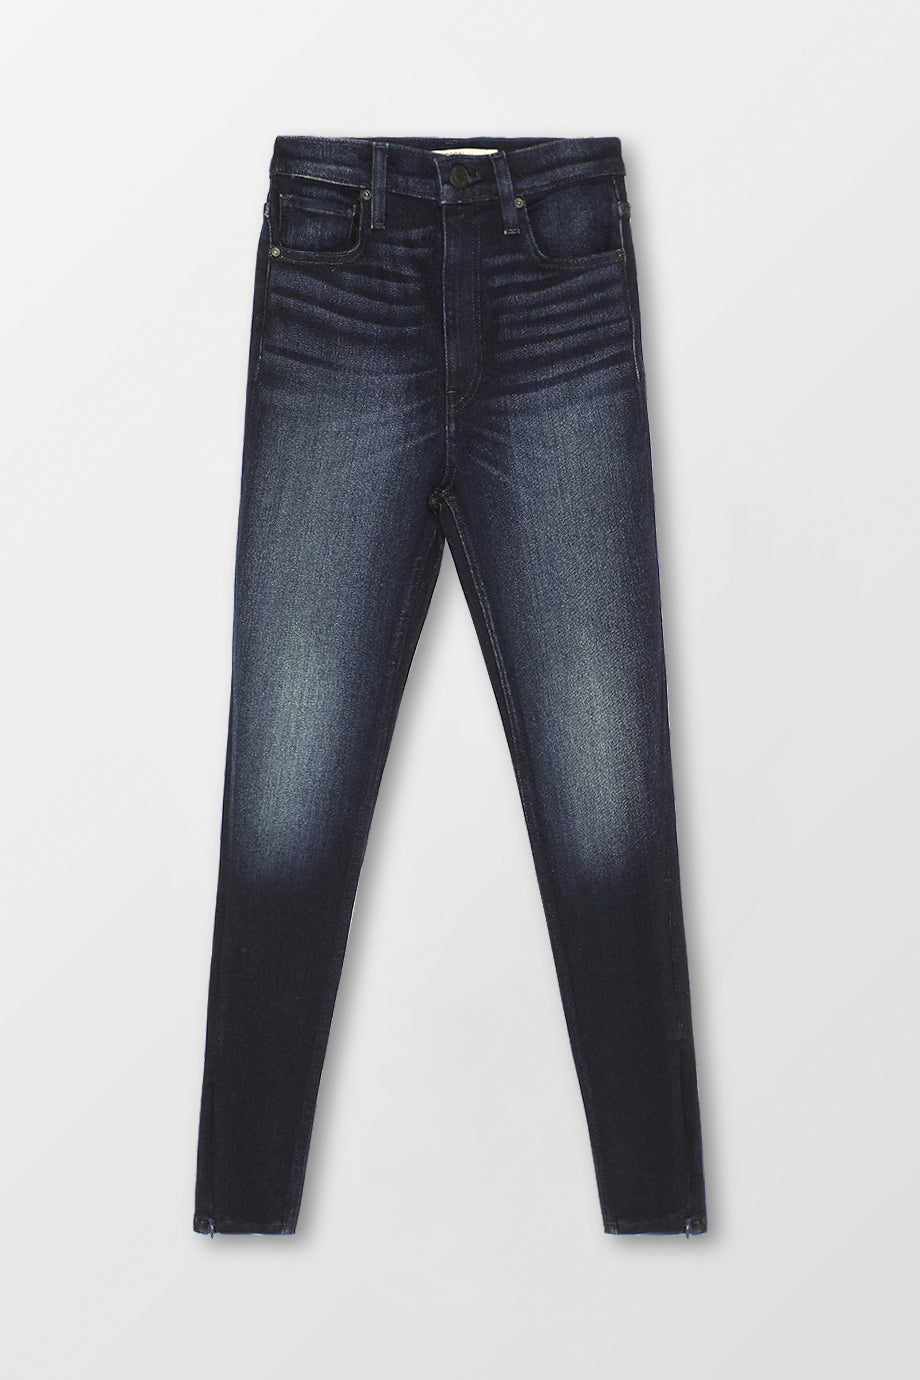 Centerfold Ankle Jeans